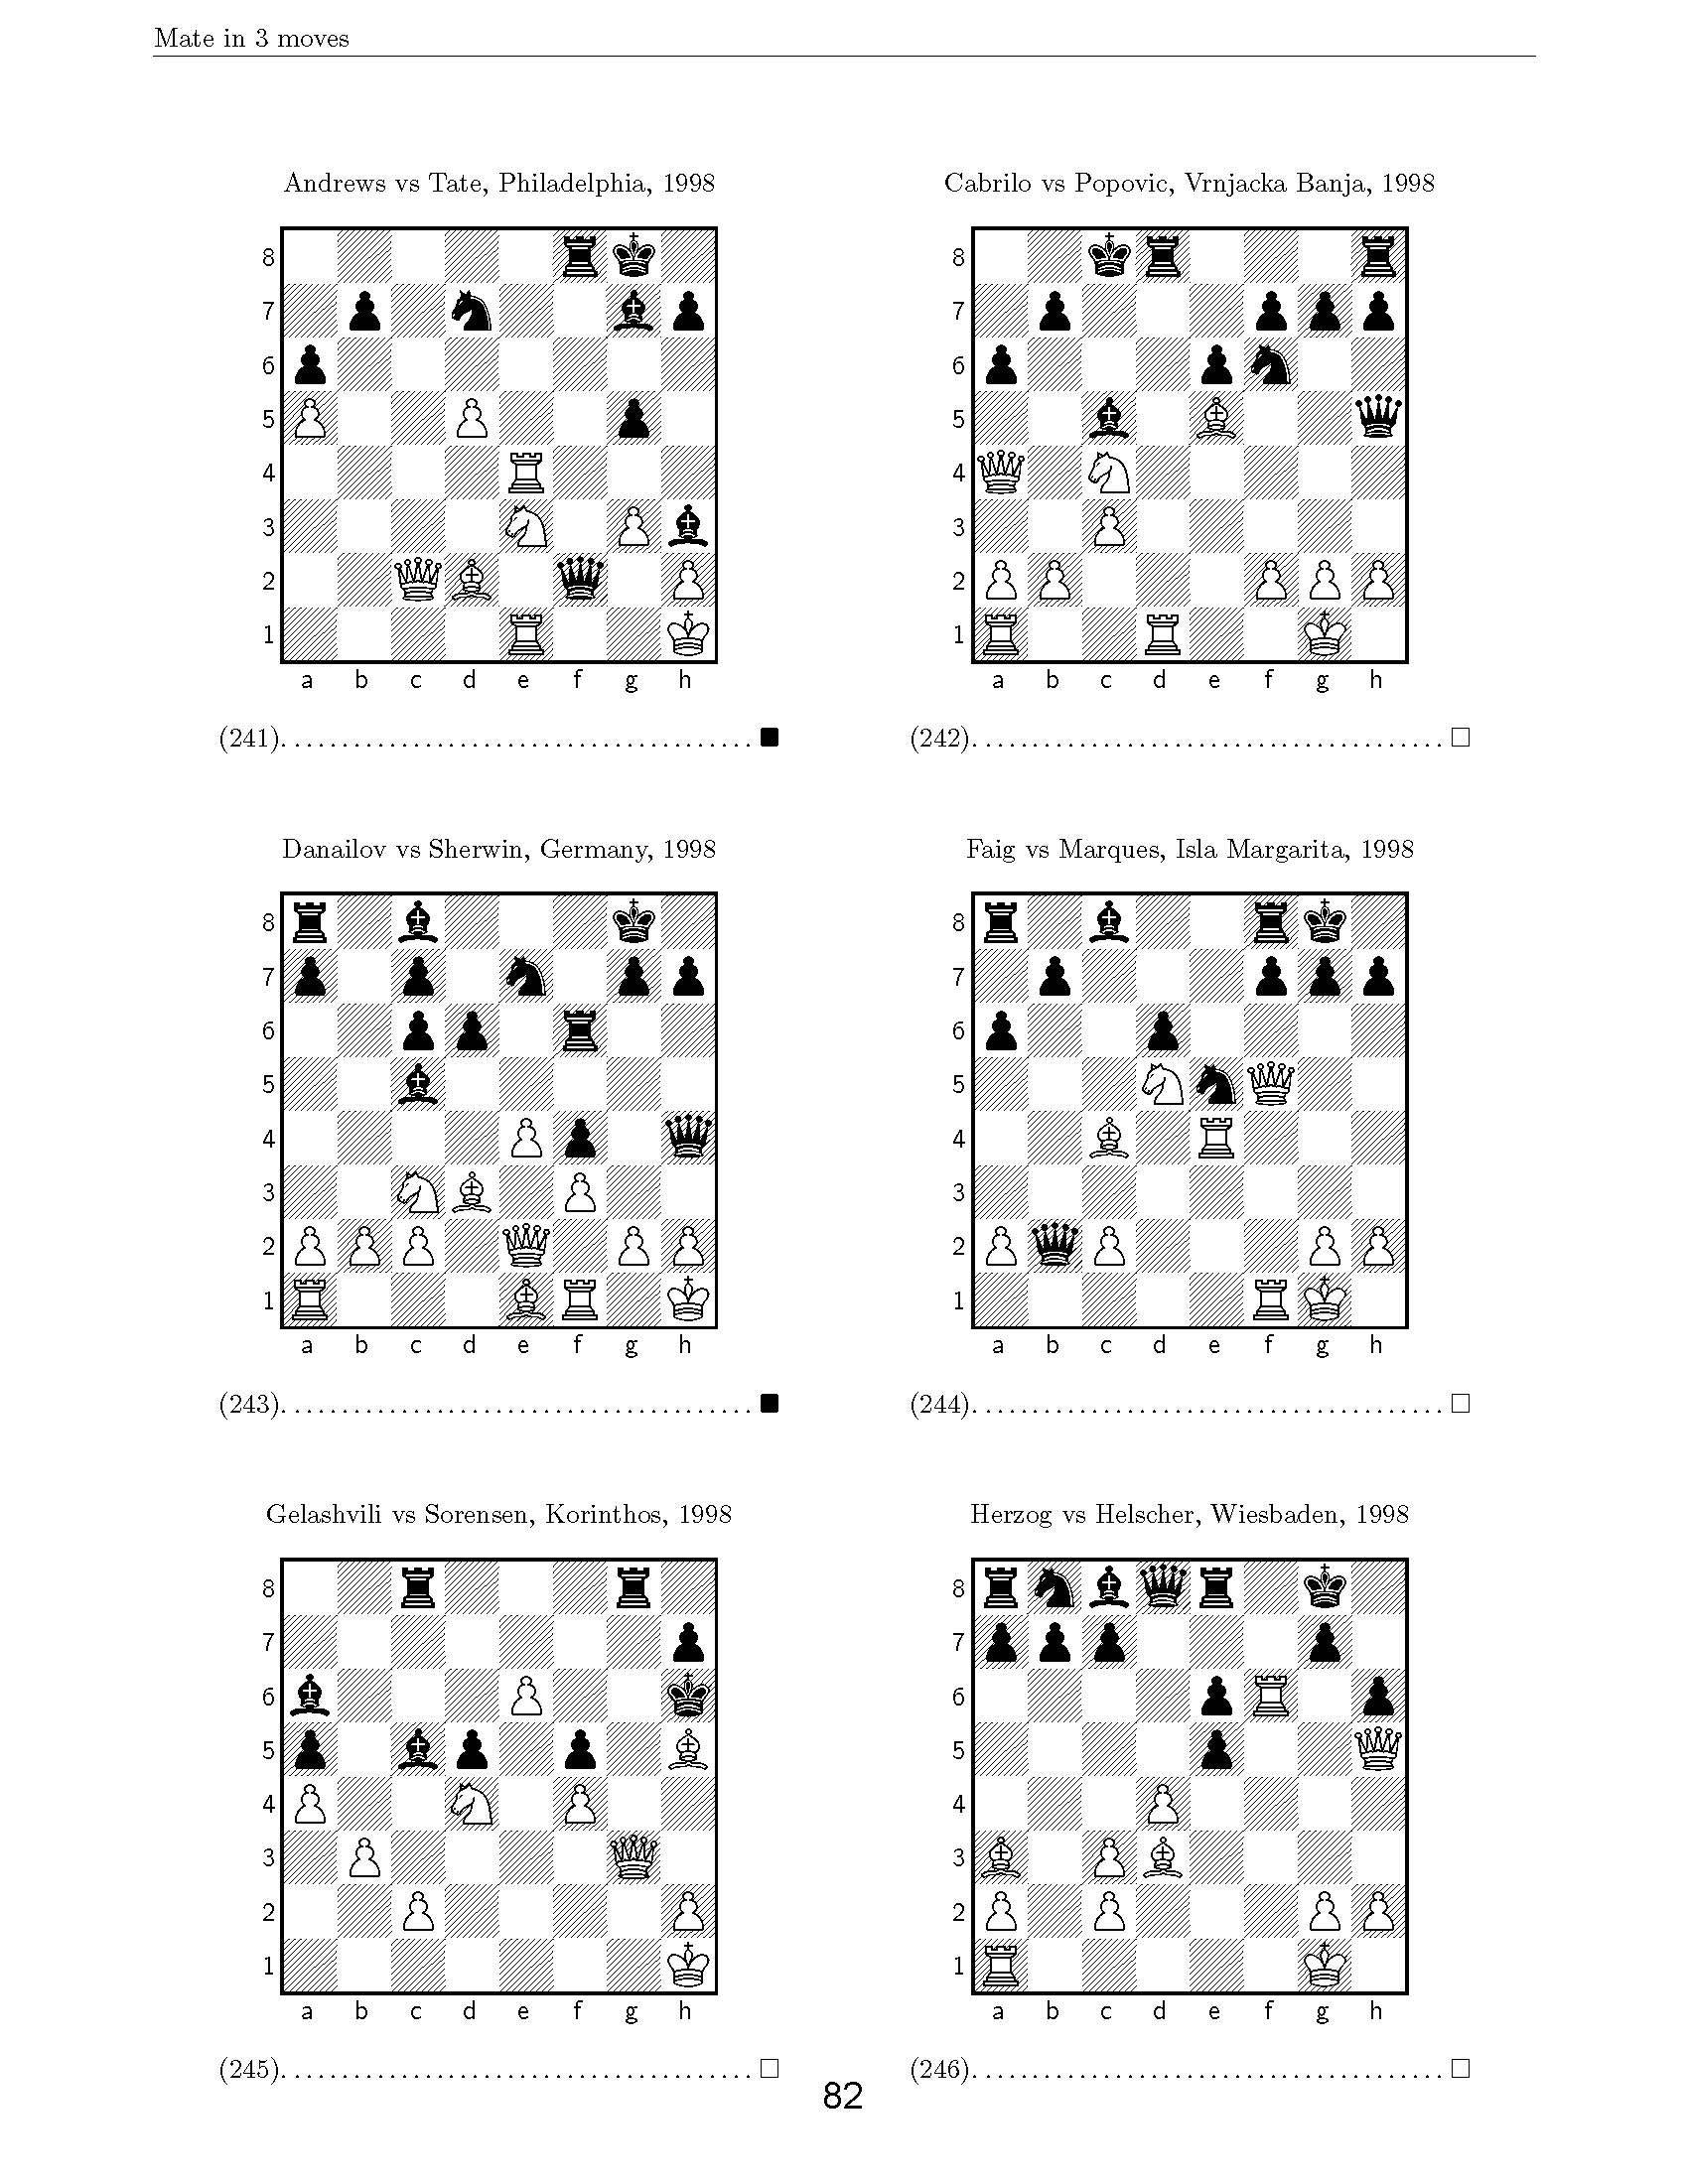 180 Checkmates Chess Puzzles in Two Moves, Part 3 by Andon Rangelov ·  OverDrive: ebooks, audiobooks, and more for libraries and schools